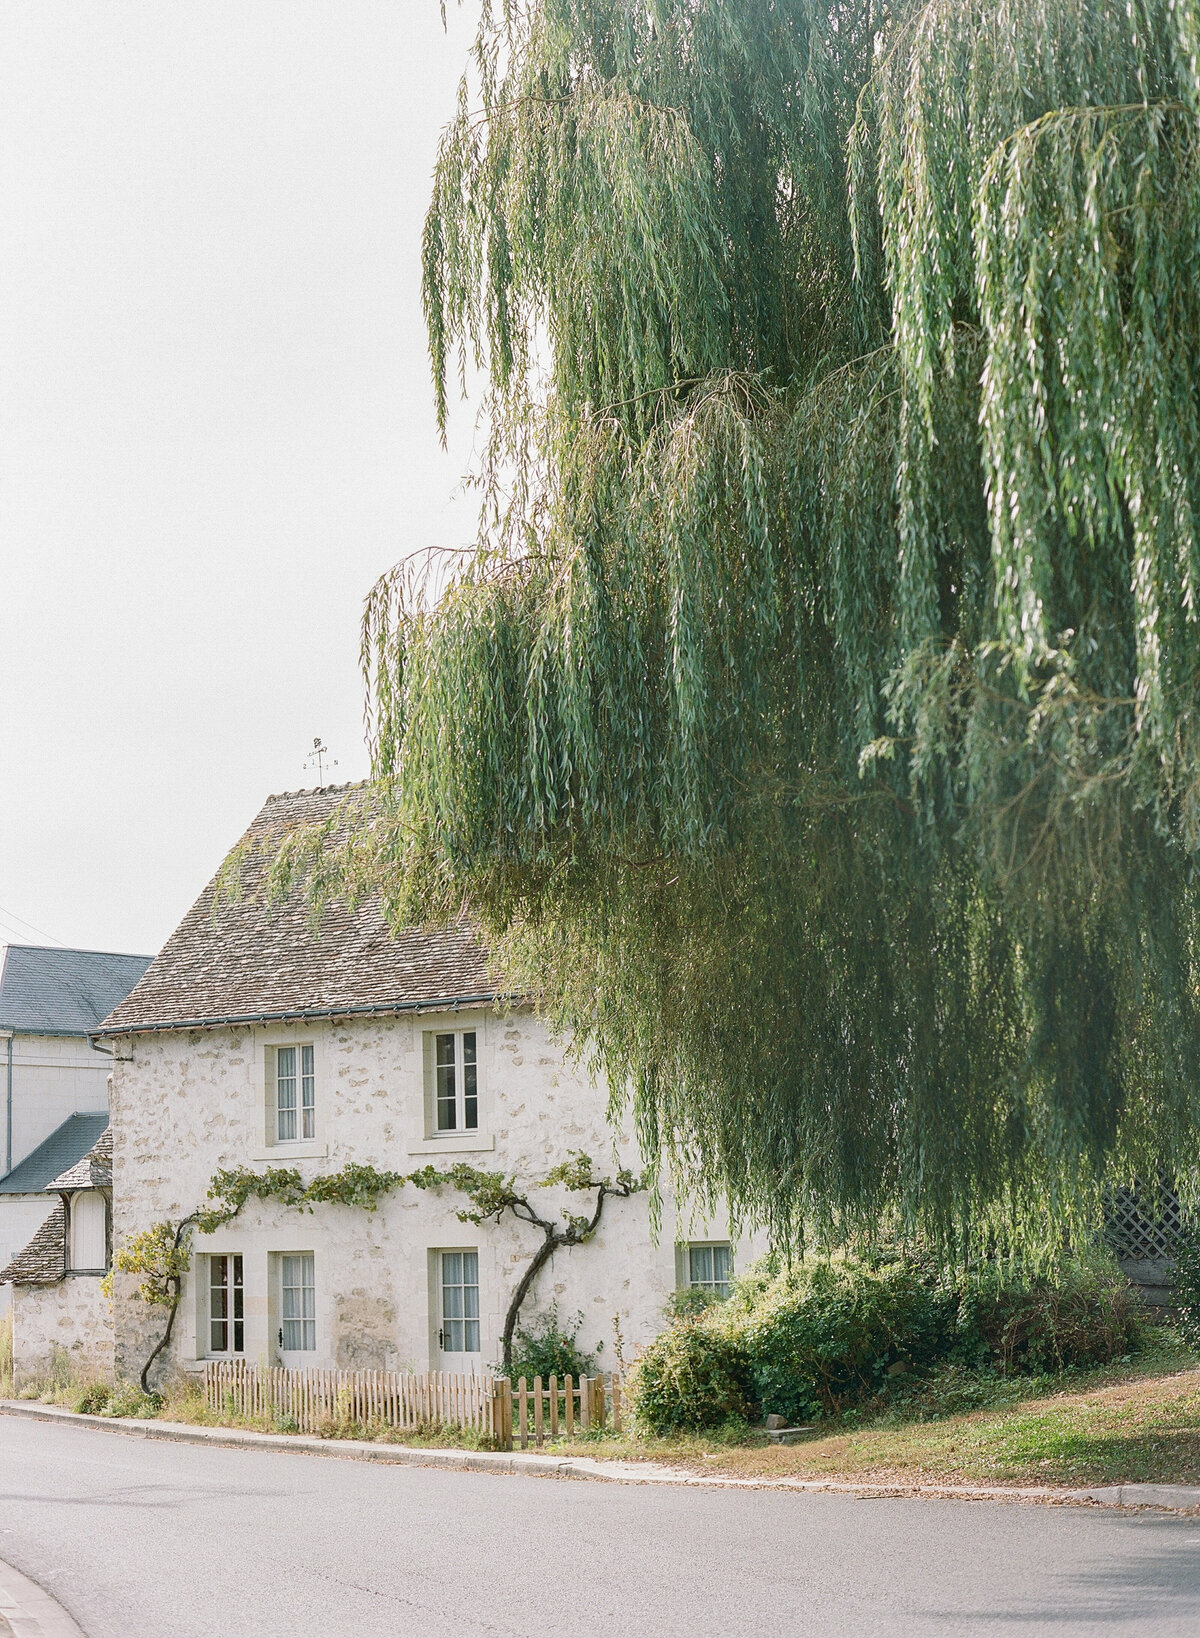 Jennifer Fox Weddings English speaking wedding planning & design agency in France crafting refined and bespoke weddings and celebrations Provence, Paris and destination Molly-Carr-Photography-Natalie-Ryan-Landscape-28